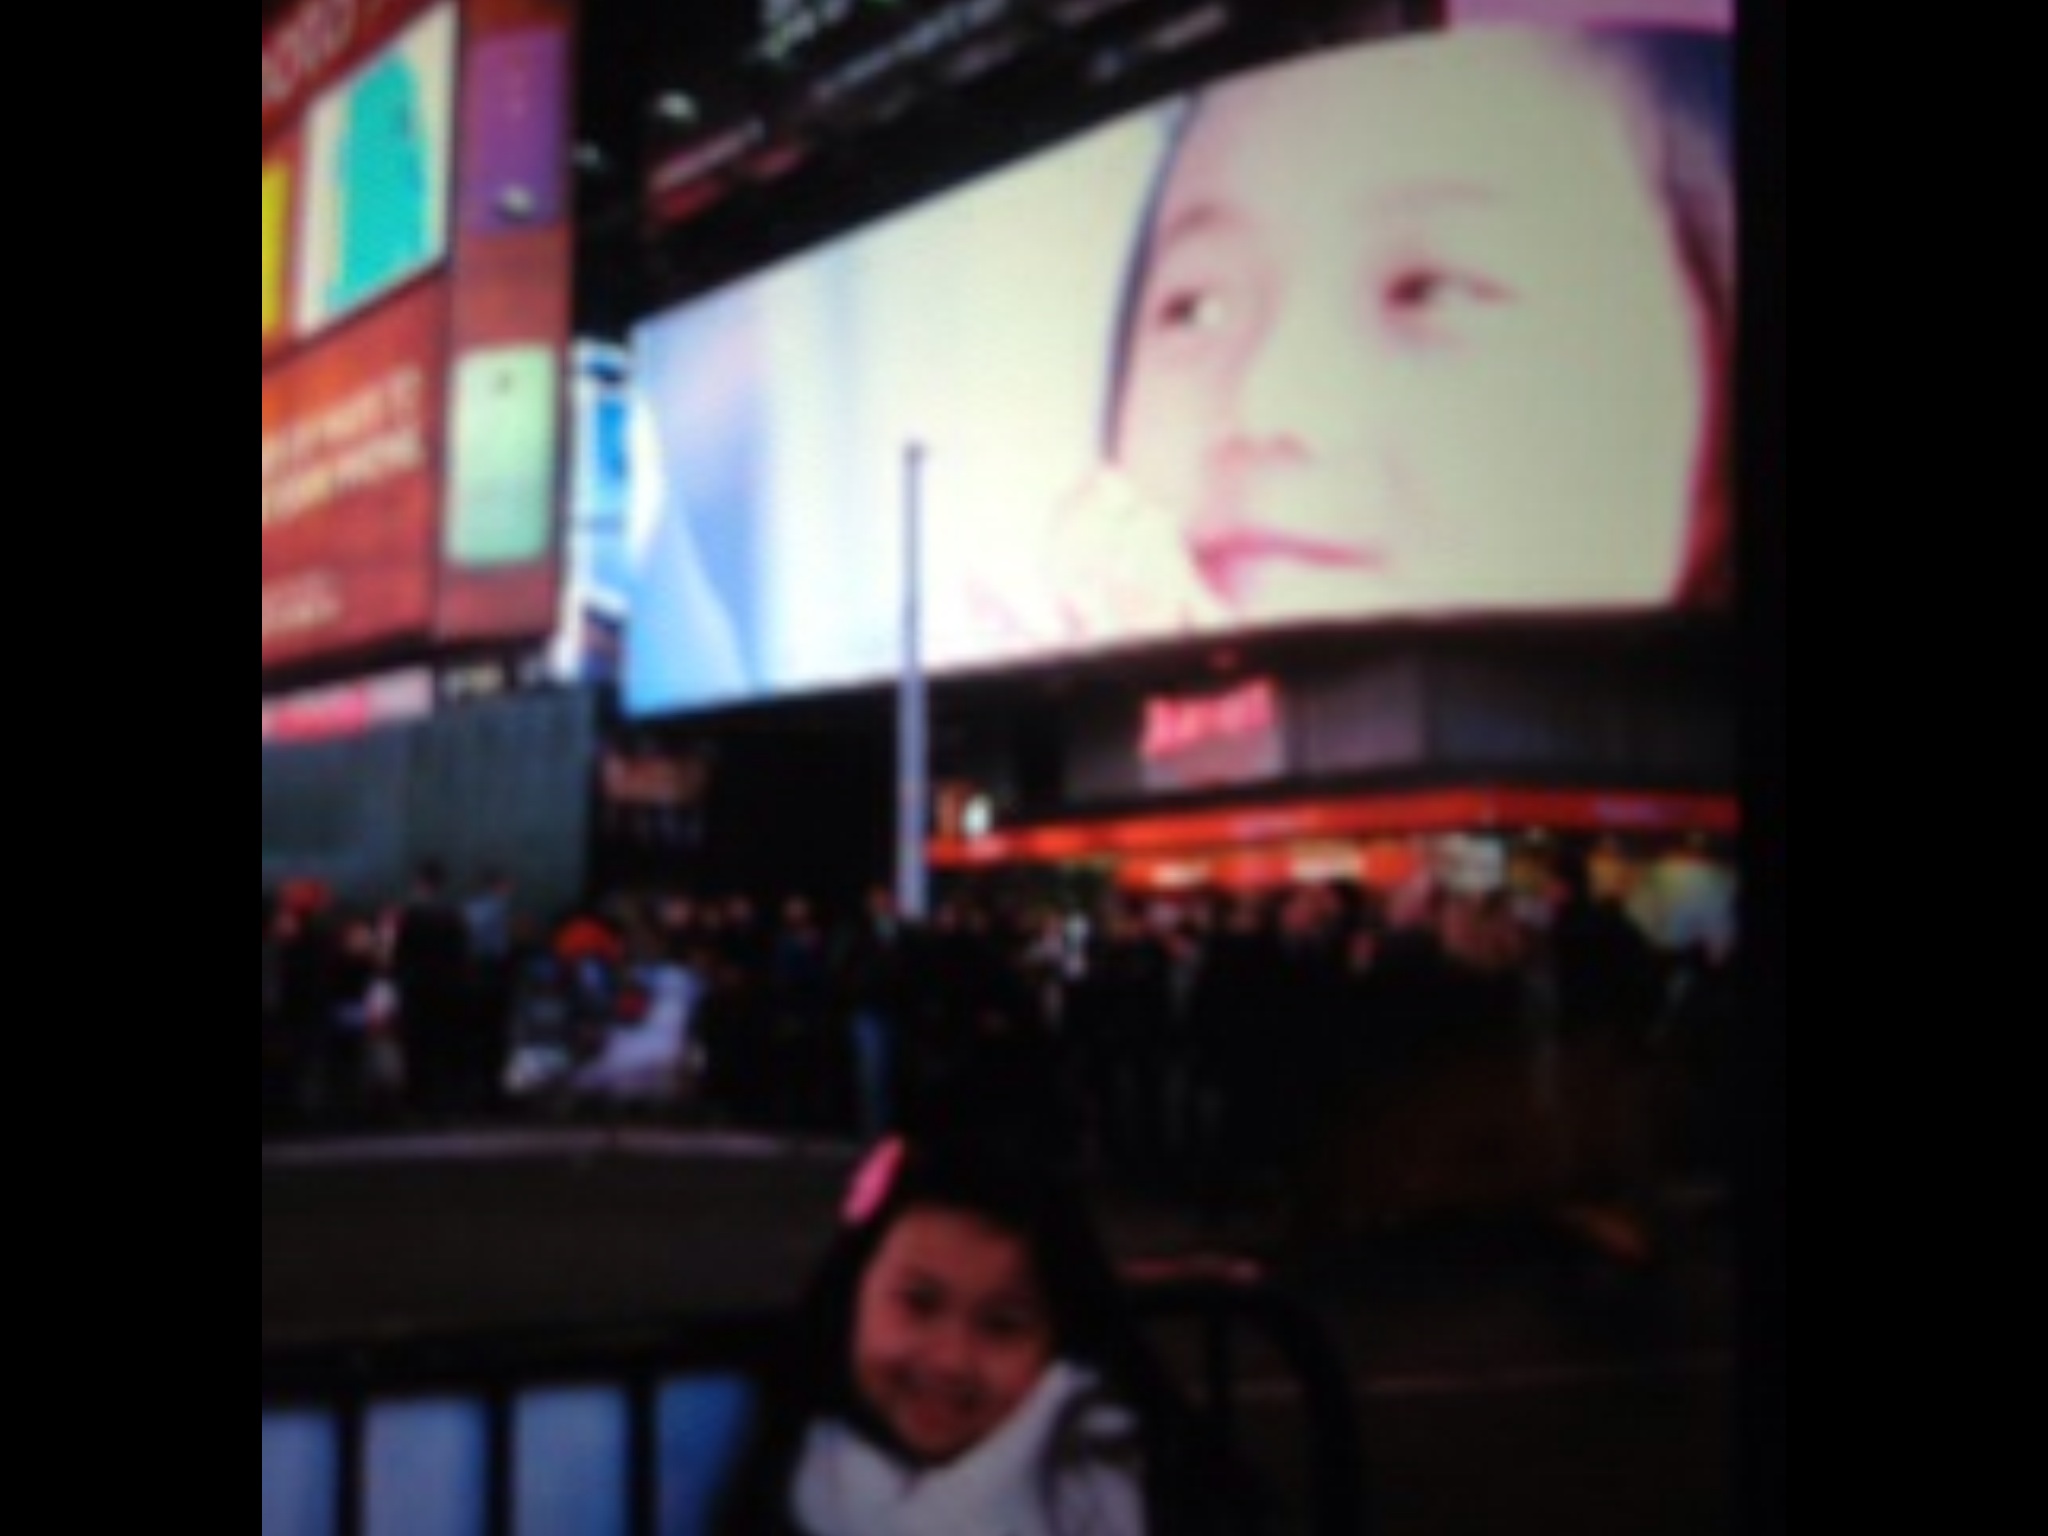 Raina Cheng in front of her Bank of America Commercial on a Times Square Jumbotron TV. 2013